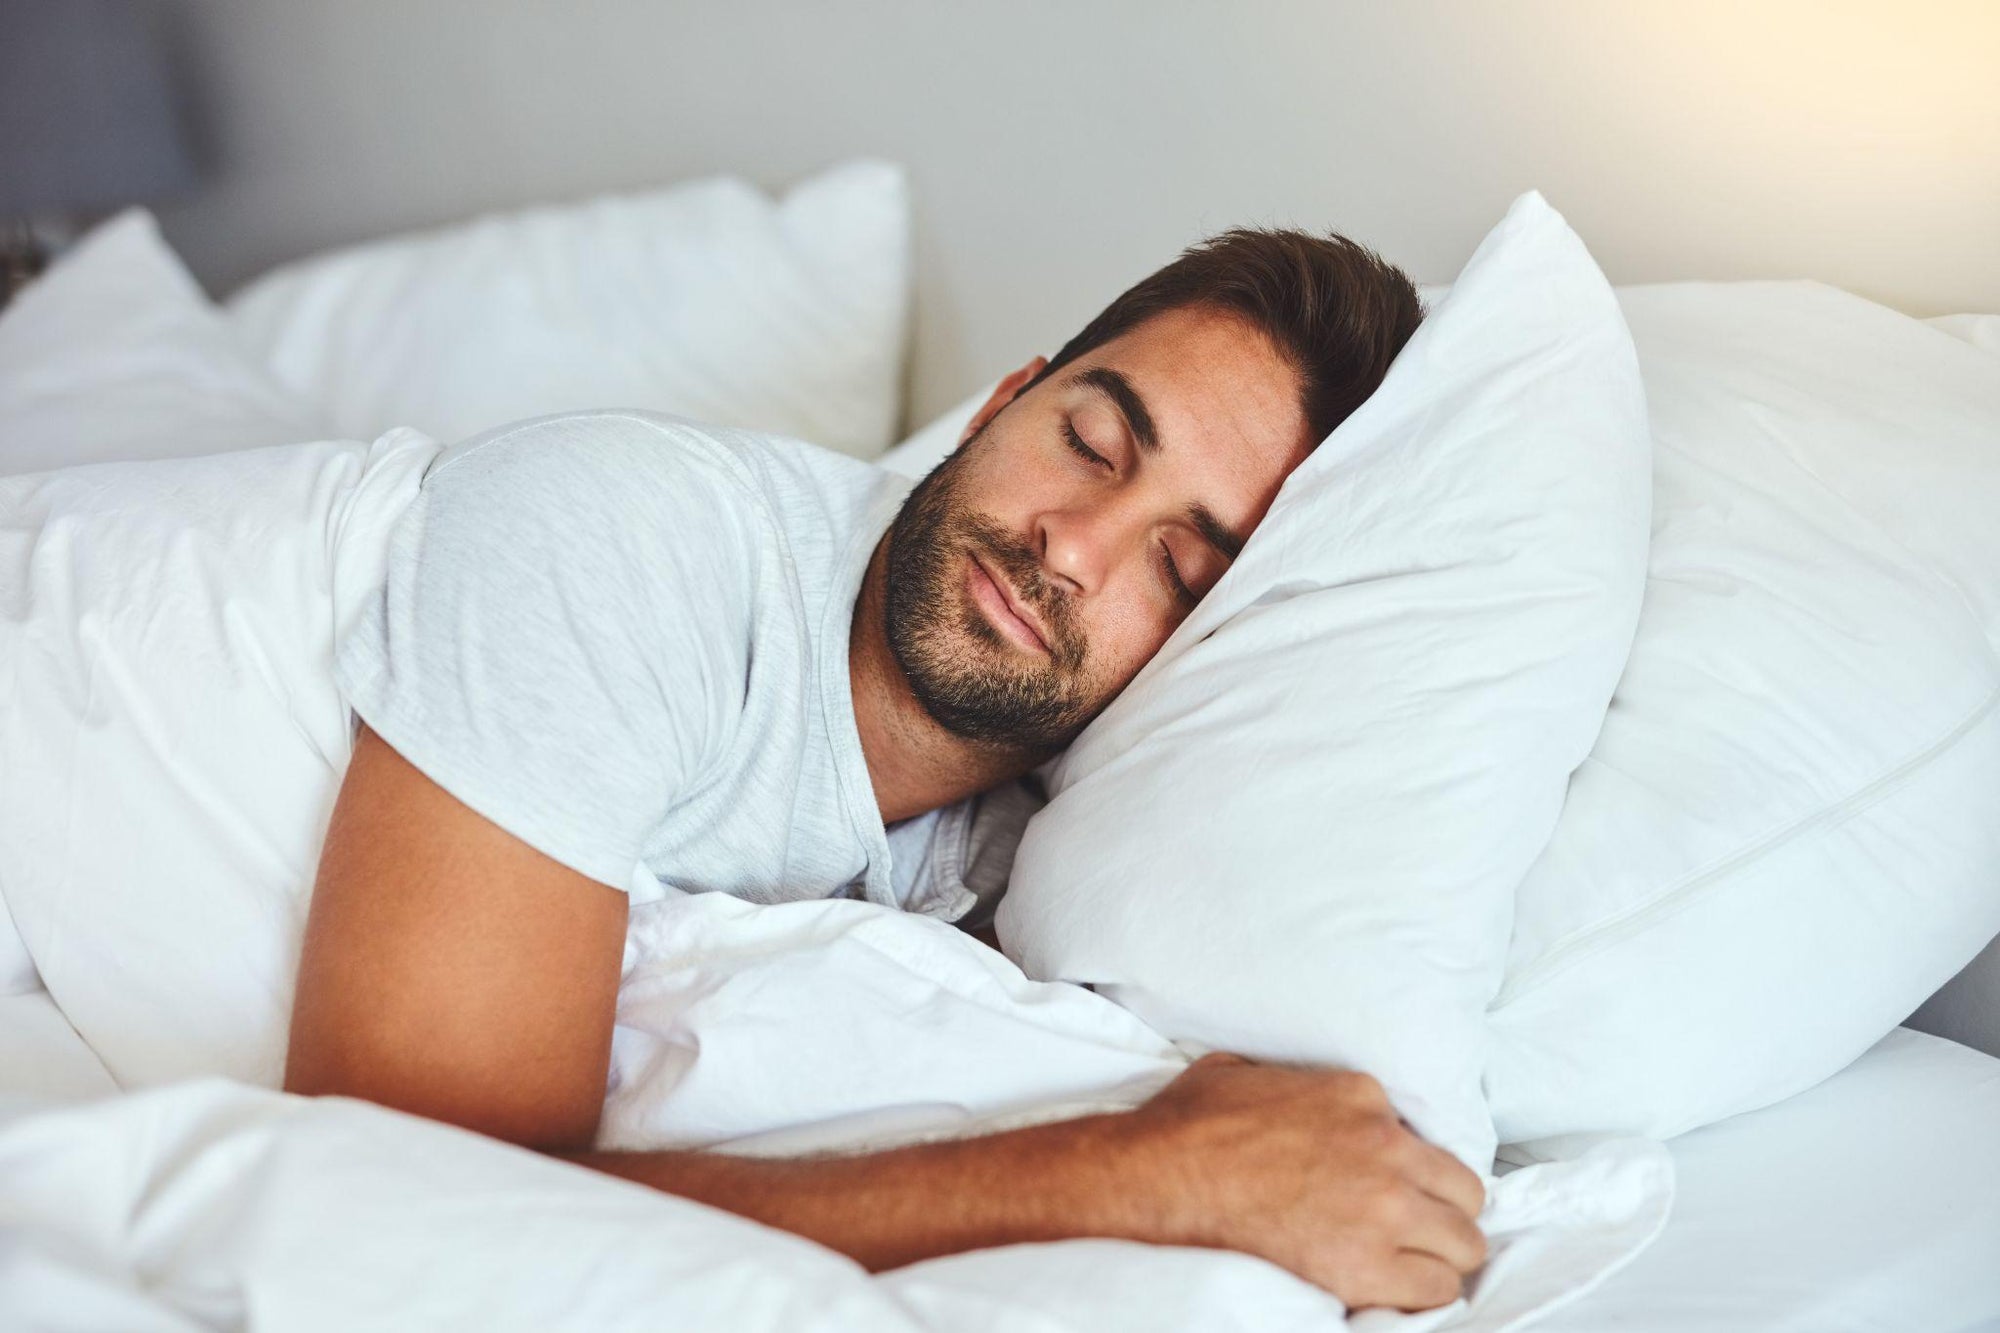 Man sleeping peacefully in bed after a workout